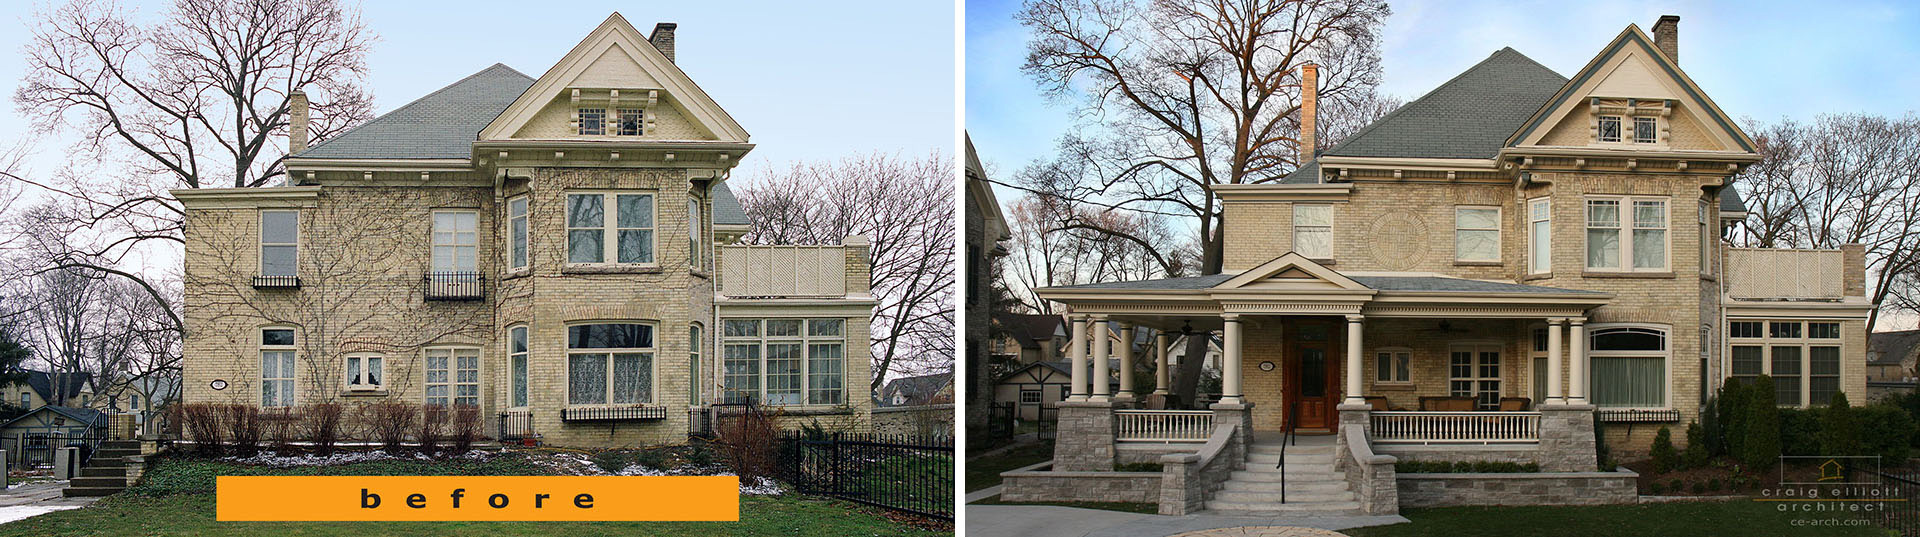 new porch to historic urban home